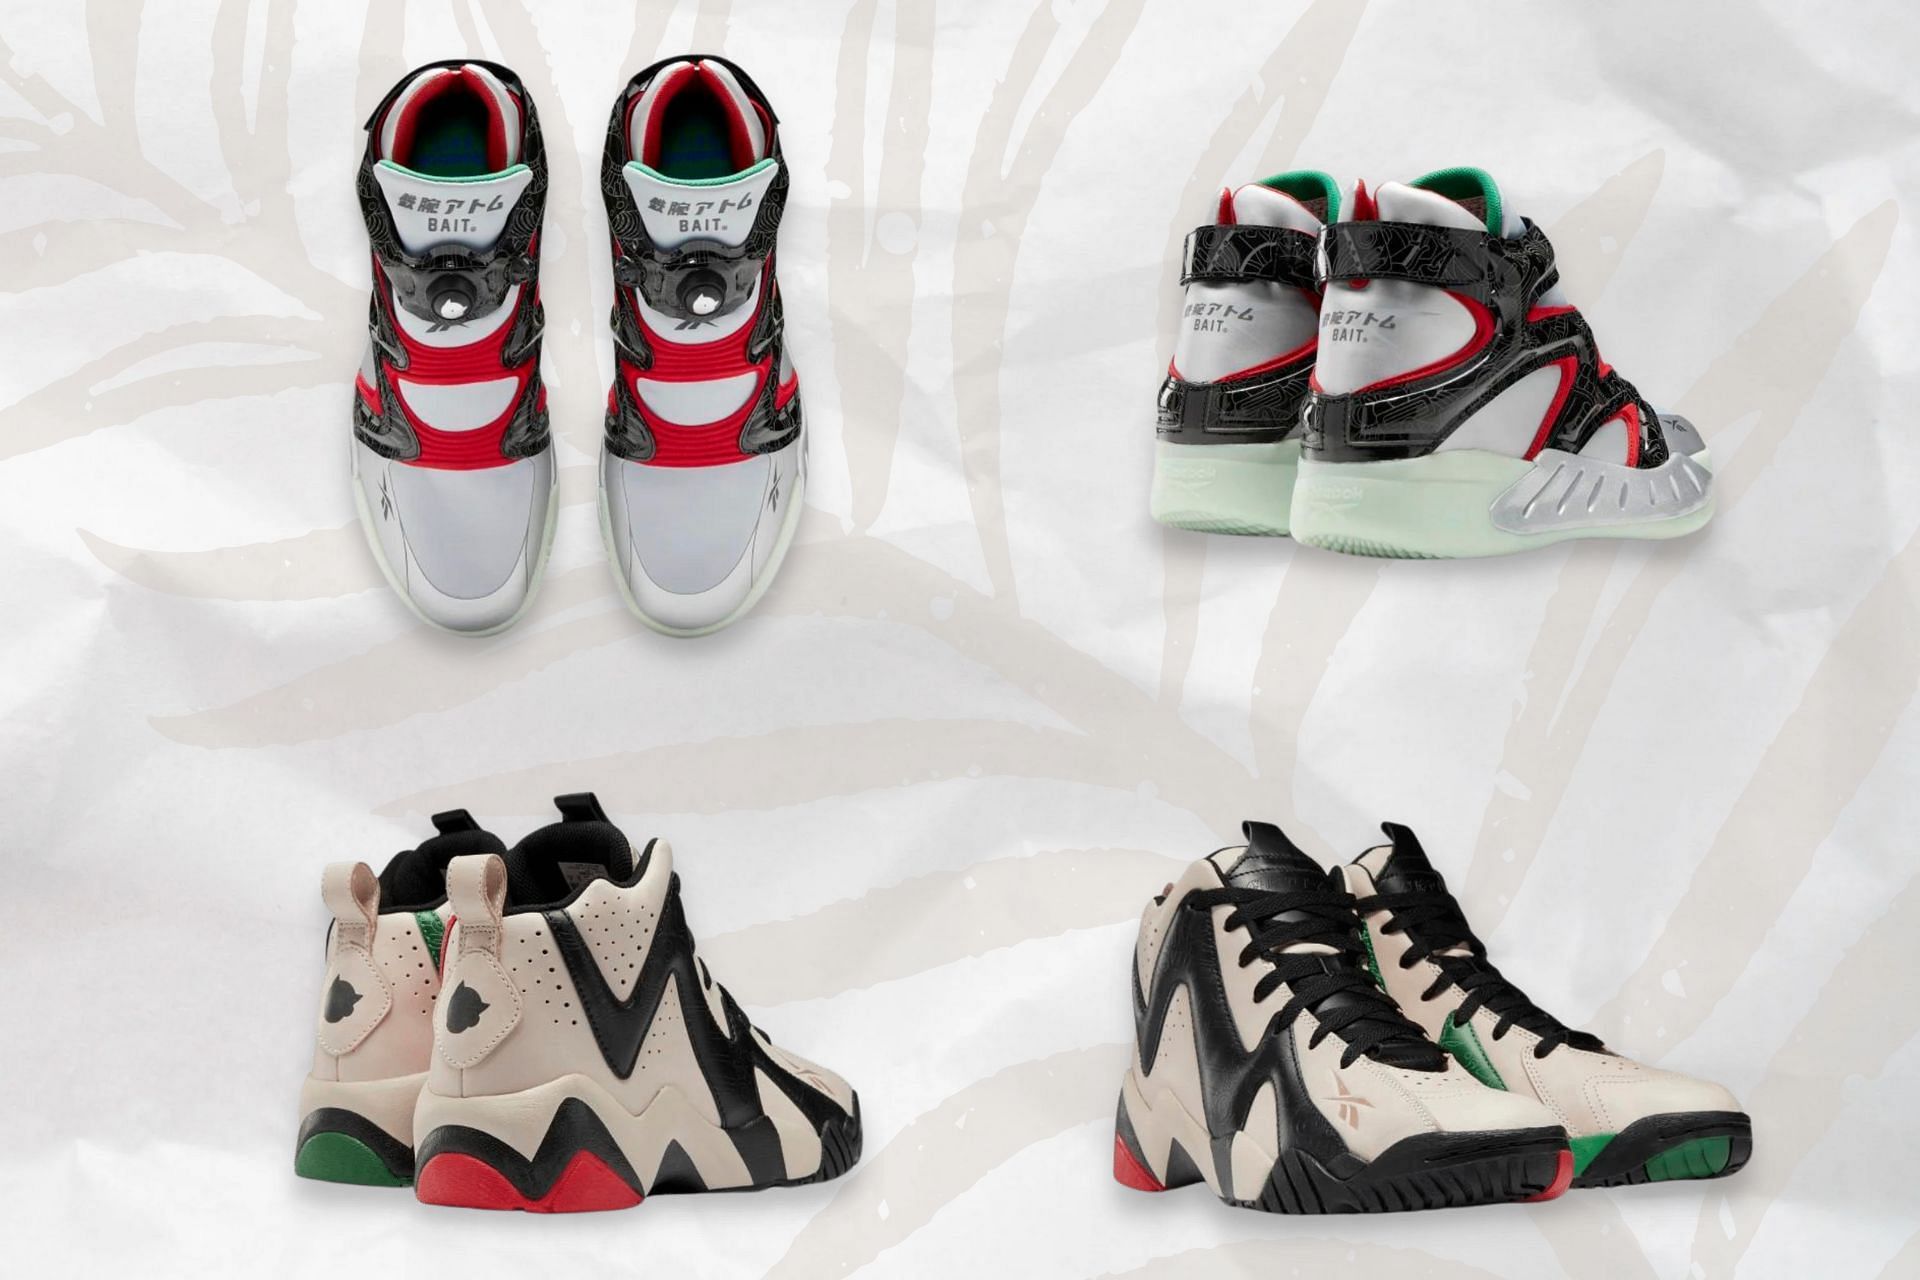 Where to buy Bait x Reebok Astro Boy collection? Price, release date, and  more explored